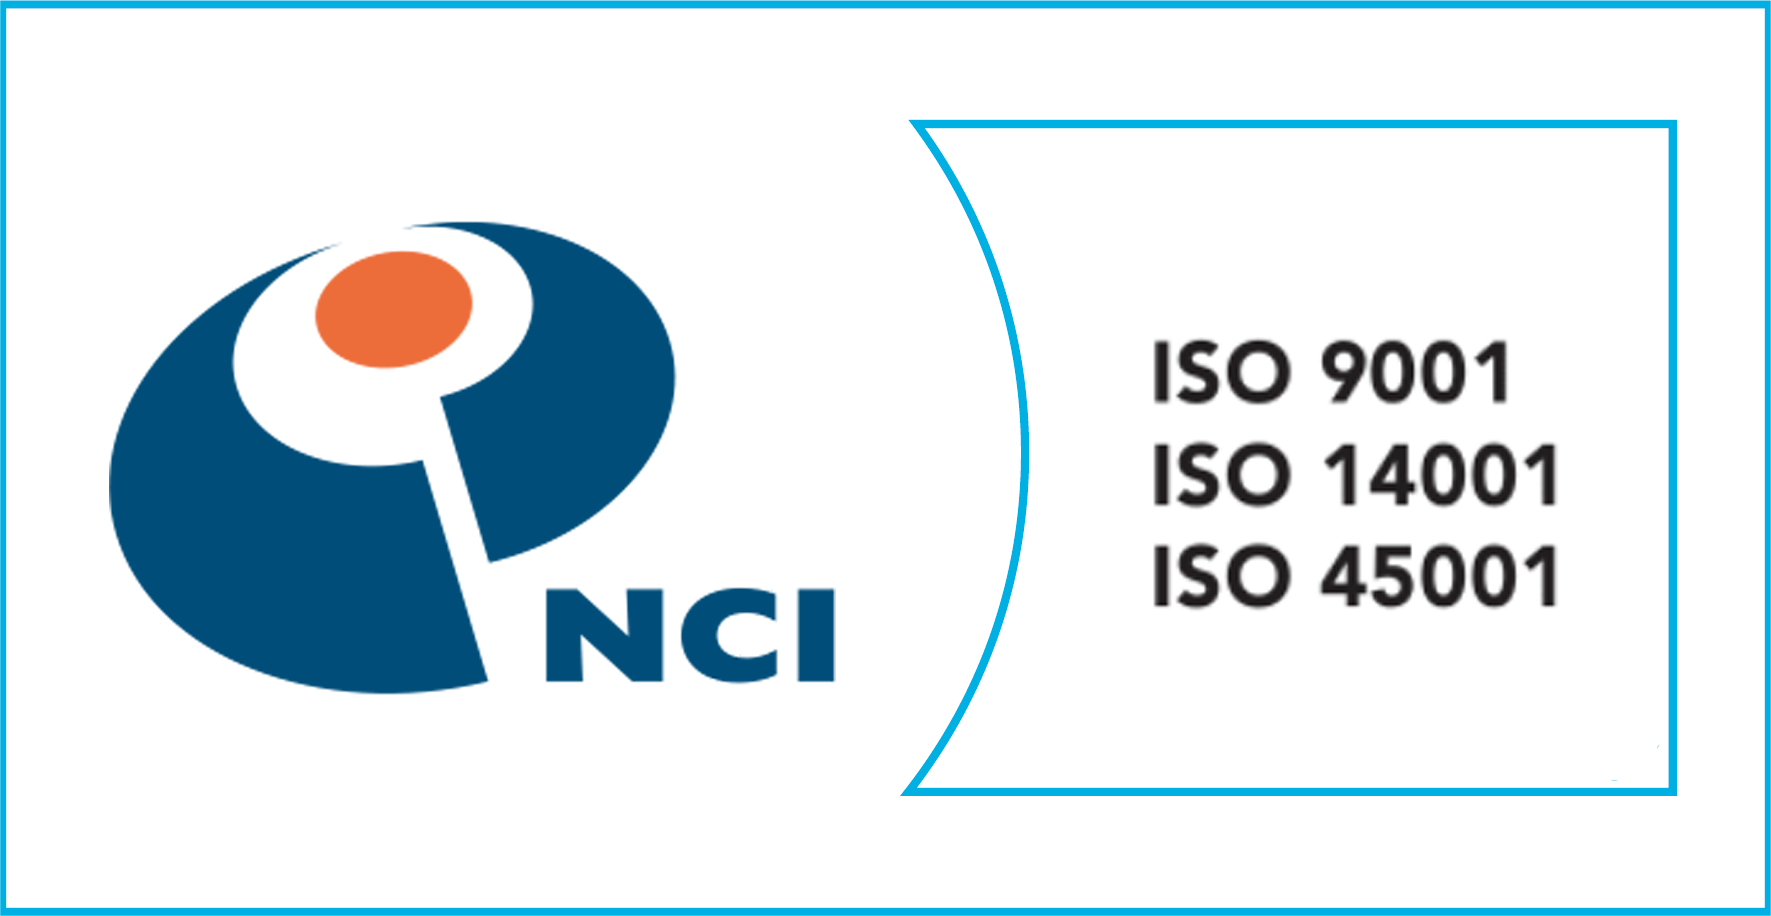 SCC-P / ISO 14001 / ISO 45001 & ISO 9001 certified by NCI